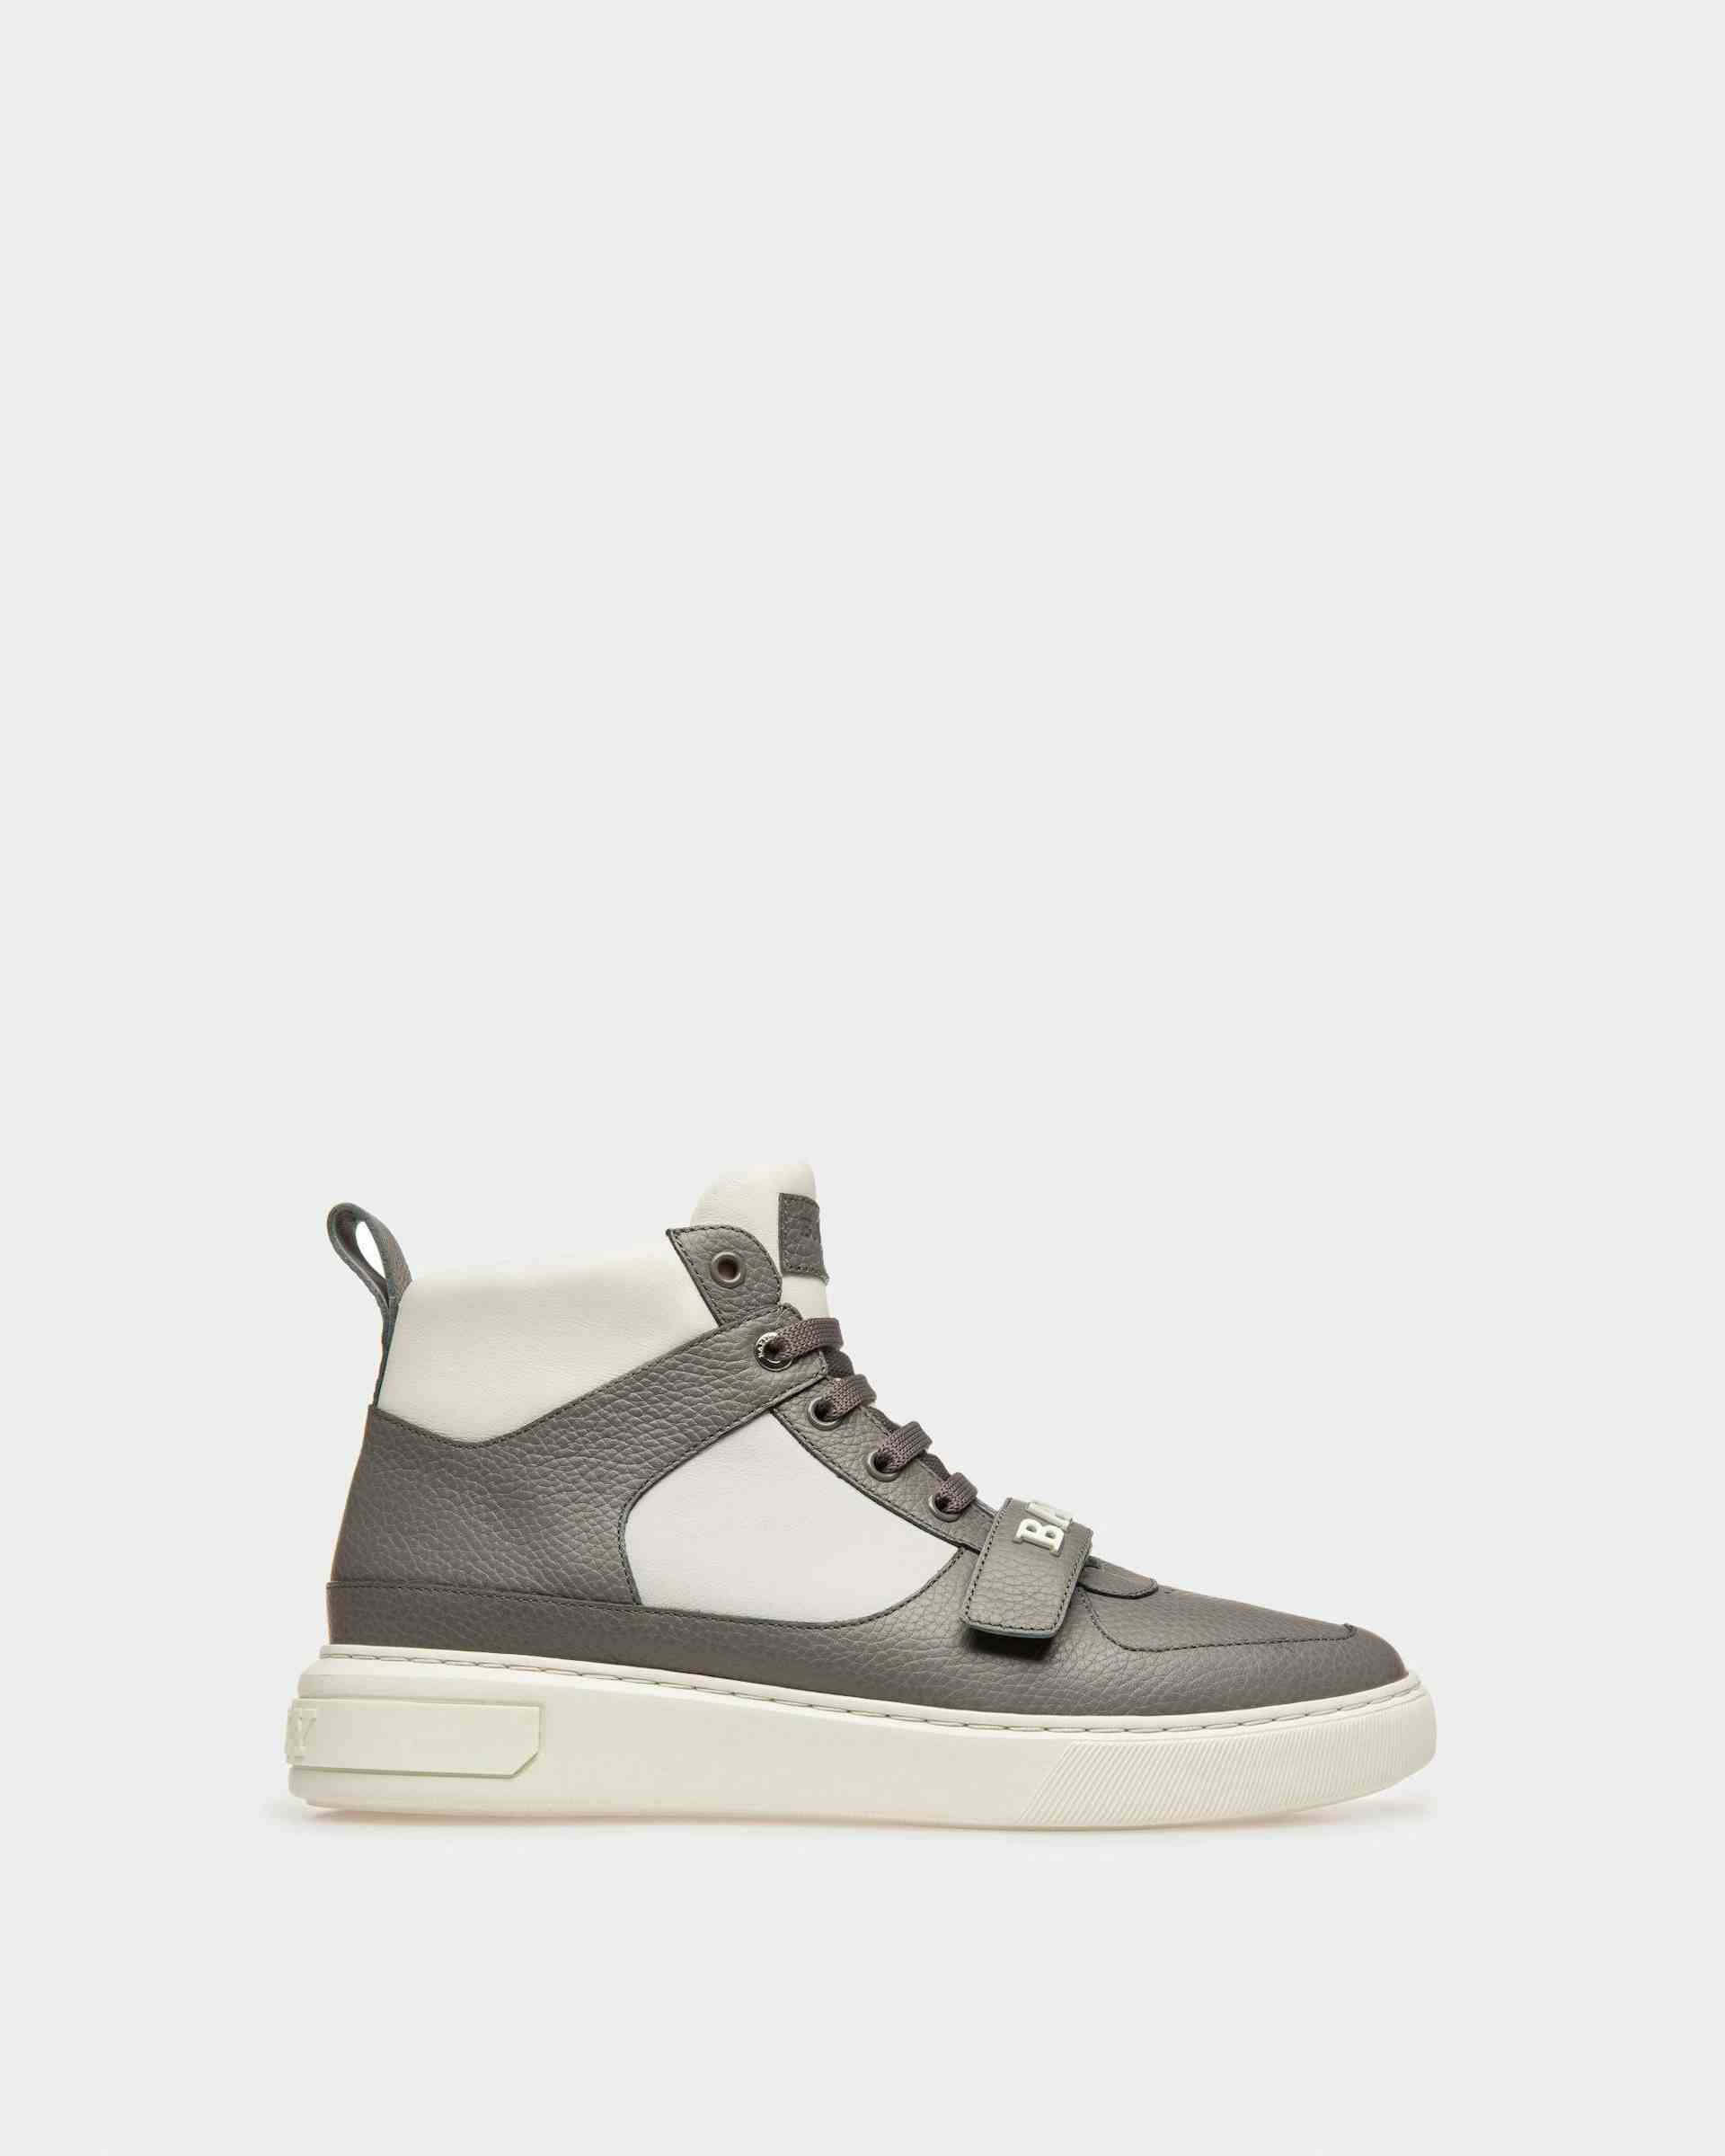 Merryk Leather Sneakers In Grey And White - Men's - Bally